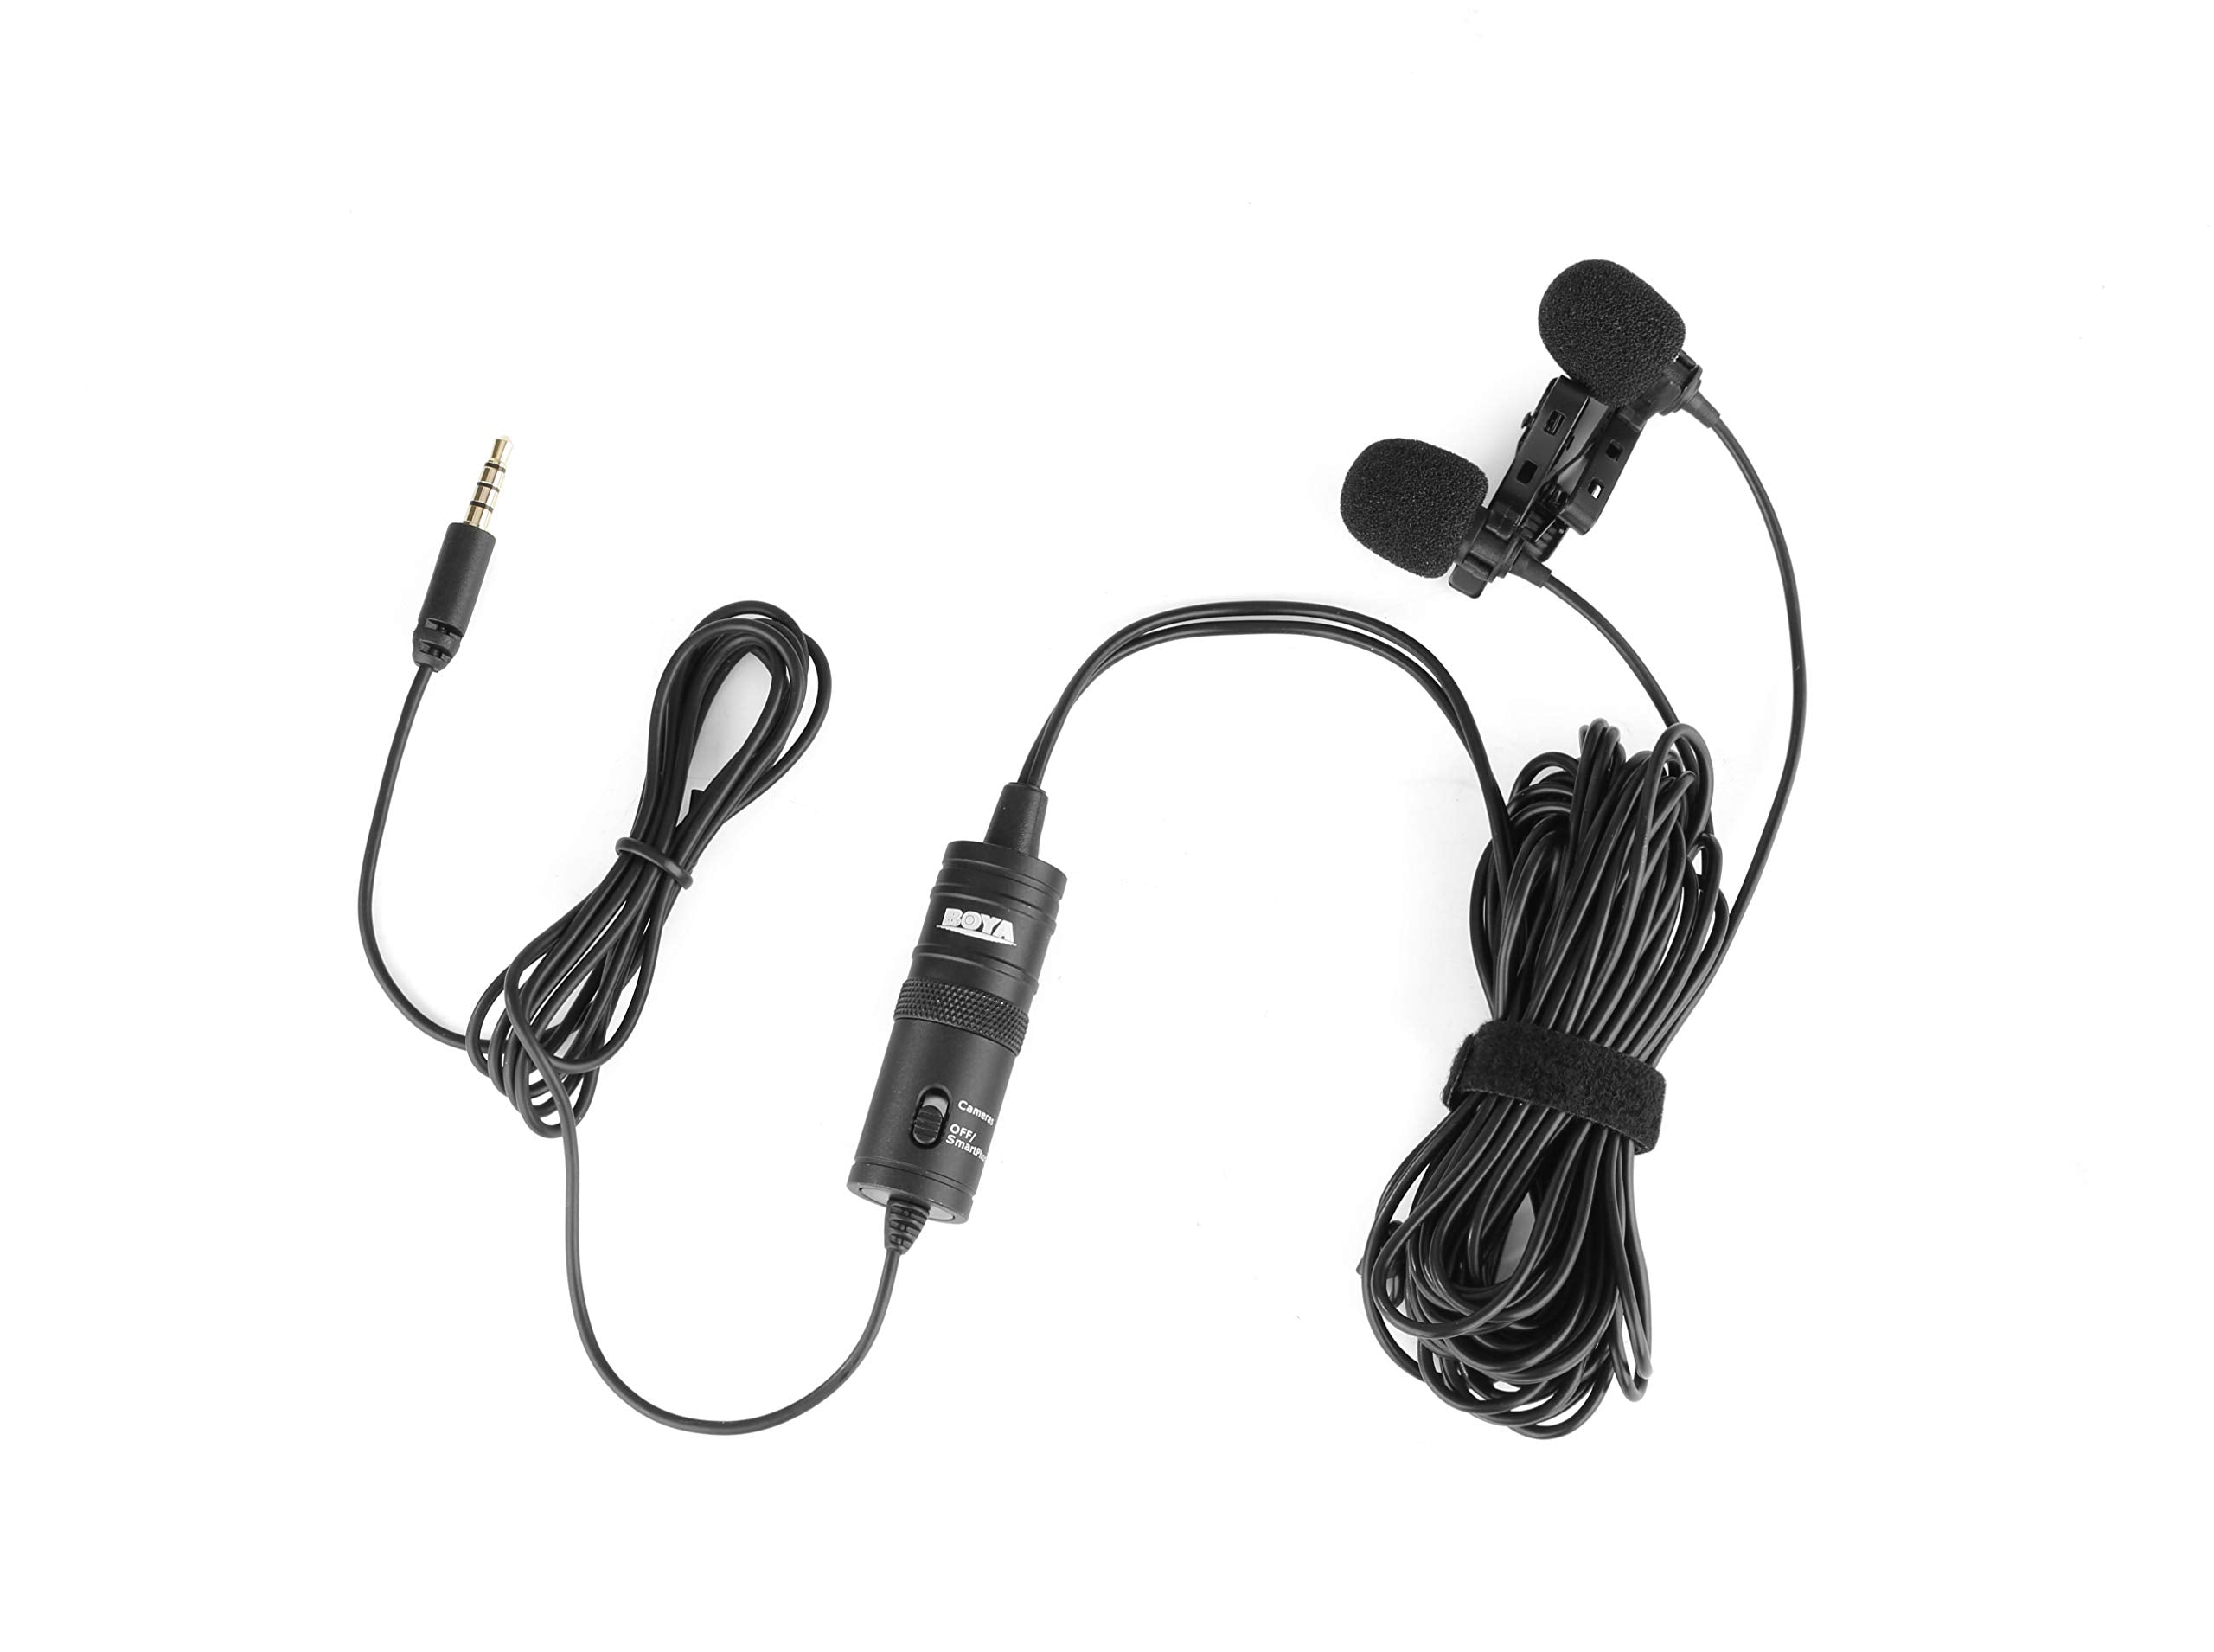 BOYA by-M1 Universal 2-Person Dual Omnidirectional Lavalier Microphone for Cameras, Smartphones, Tablets, Computers, Recorders & More, Black, (BY-M1DM)  - Very Good